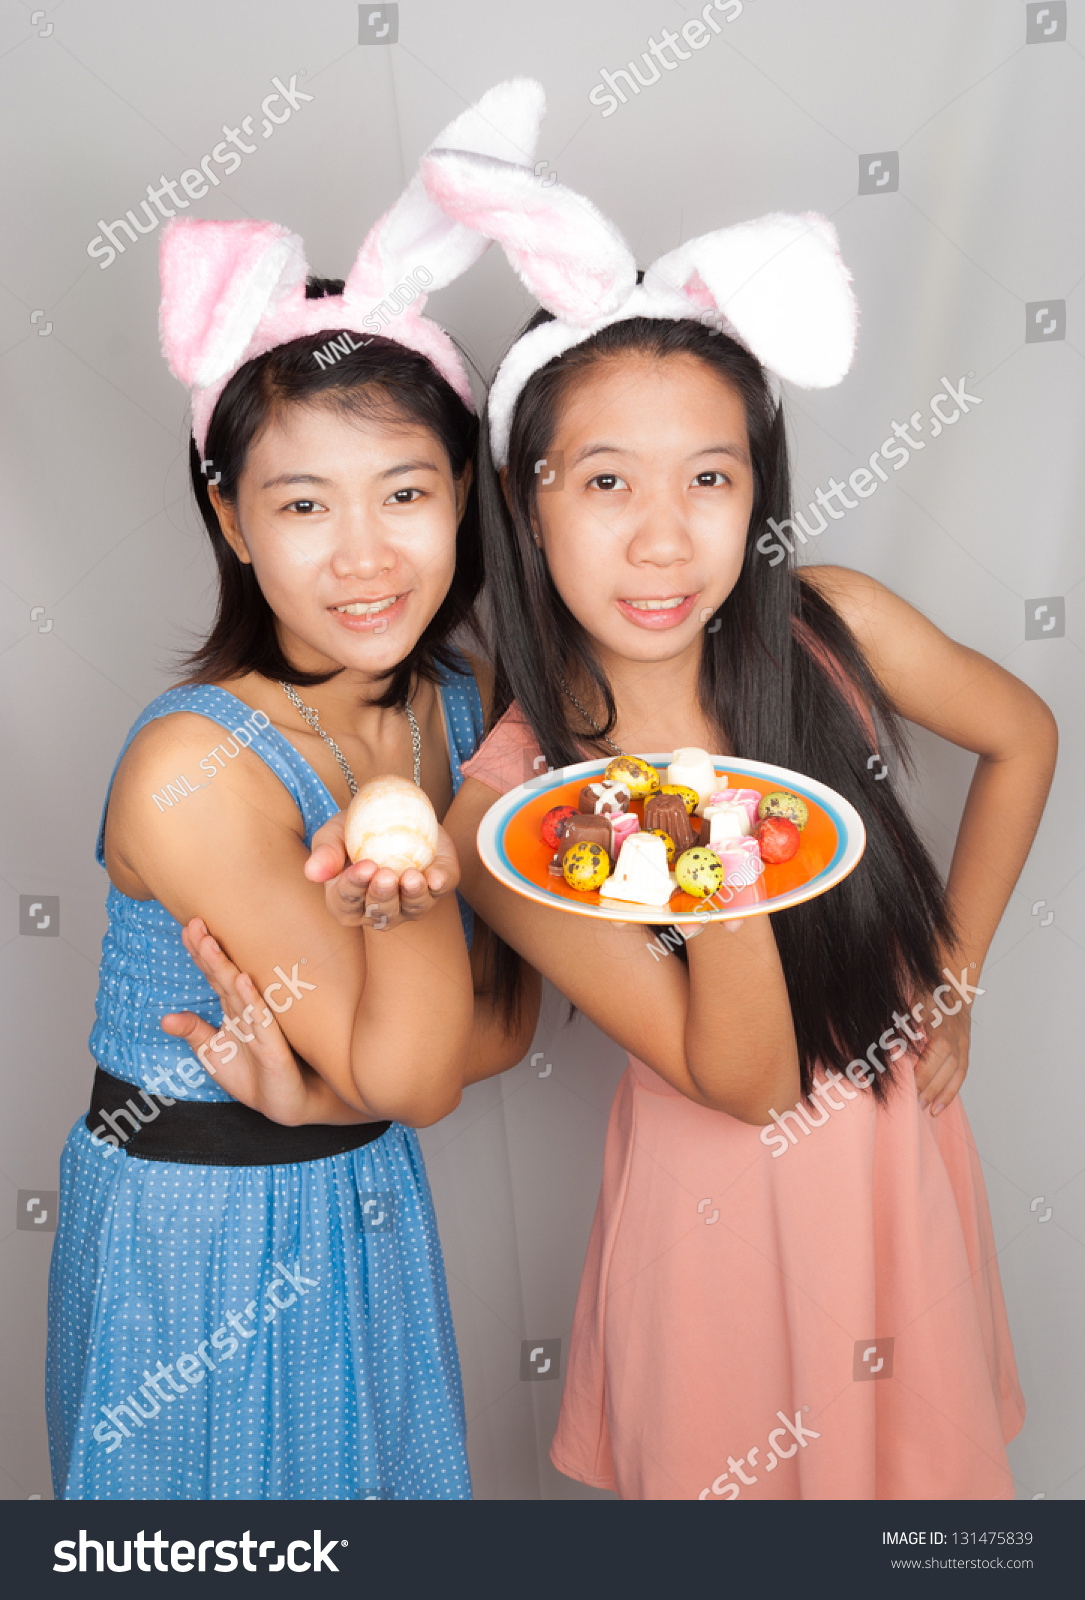 Cute Asian Bunny Girls Hold Plate Stock